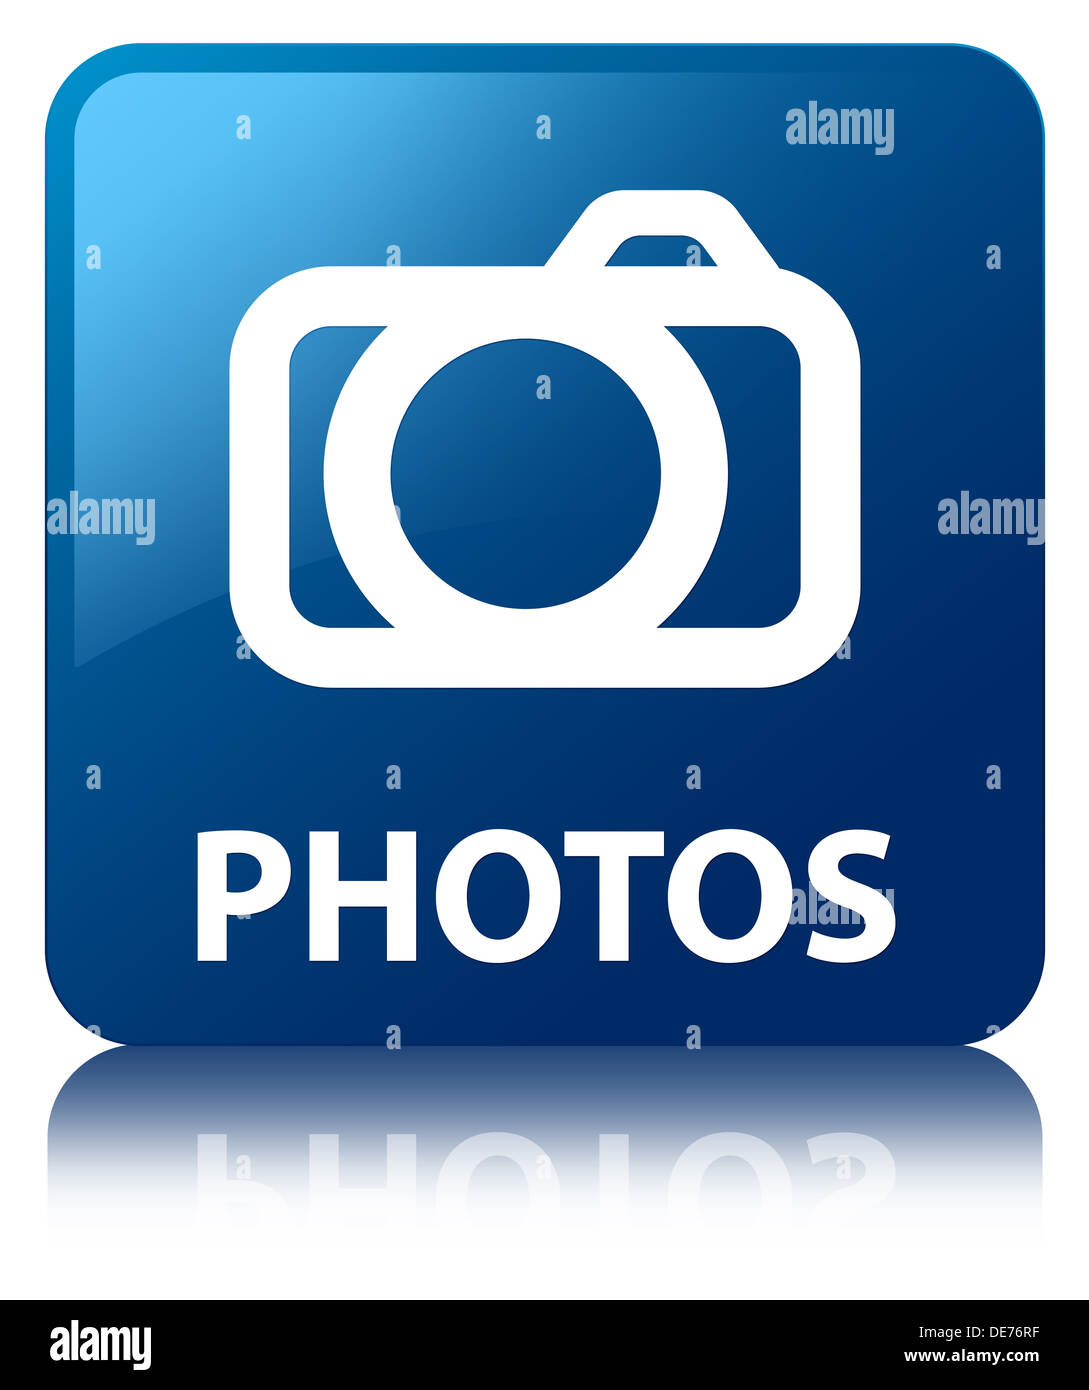 Photos glossy blue square button Stock Photo